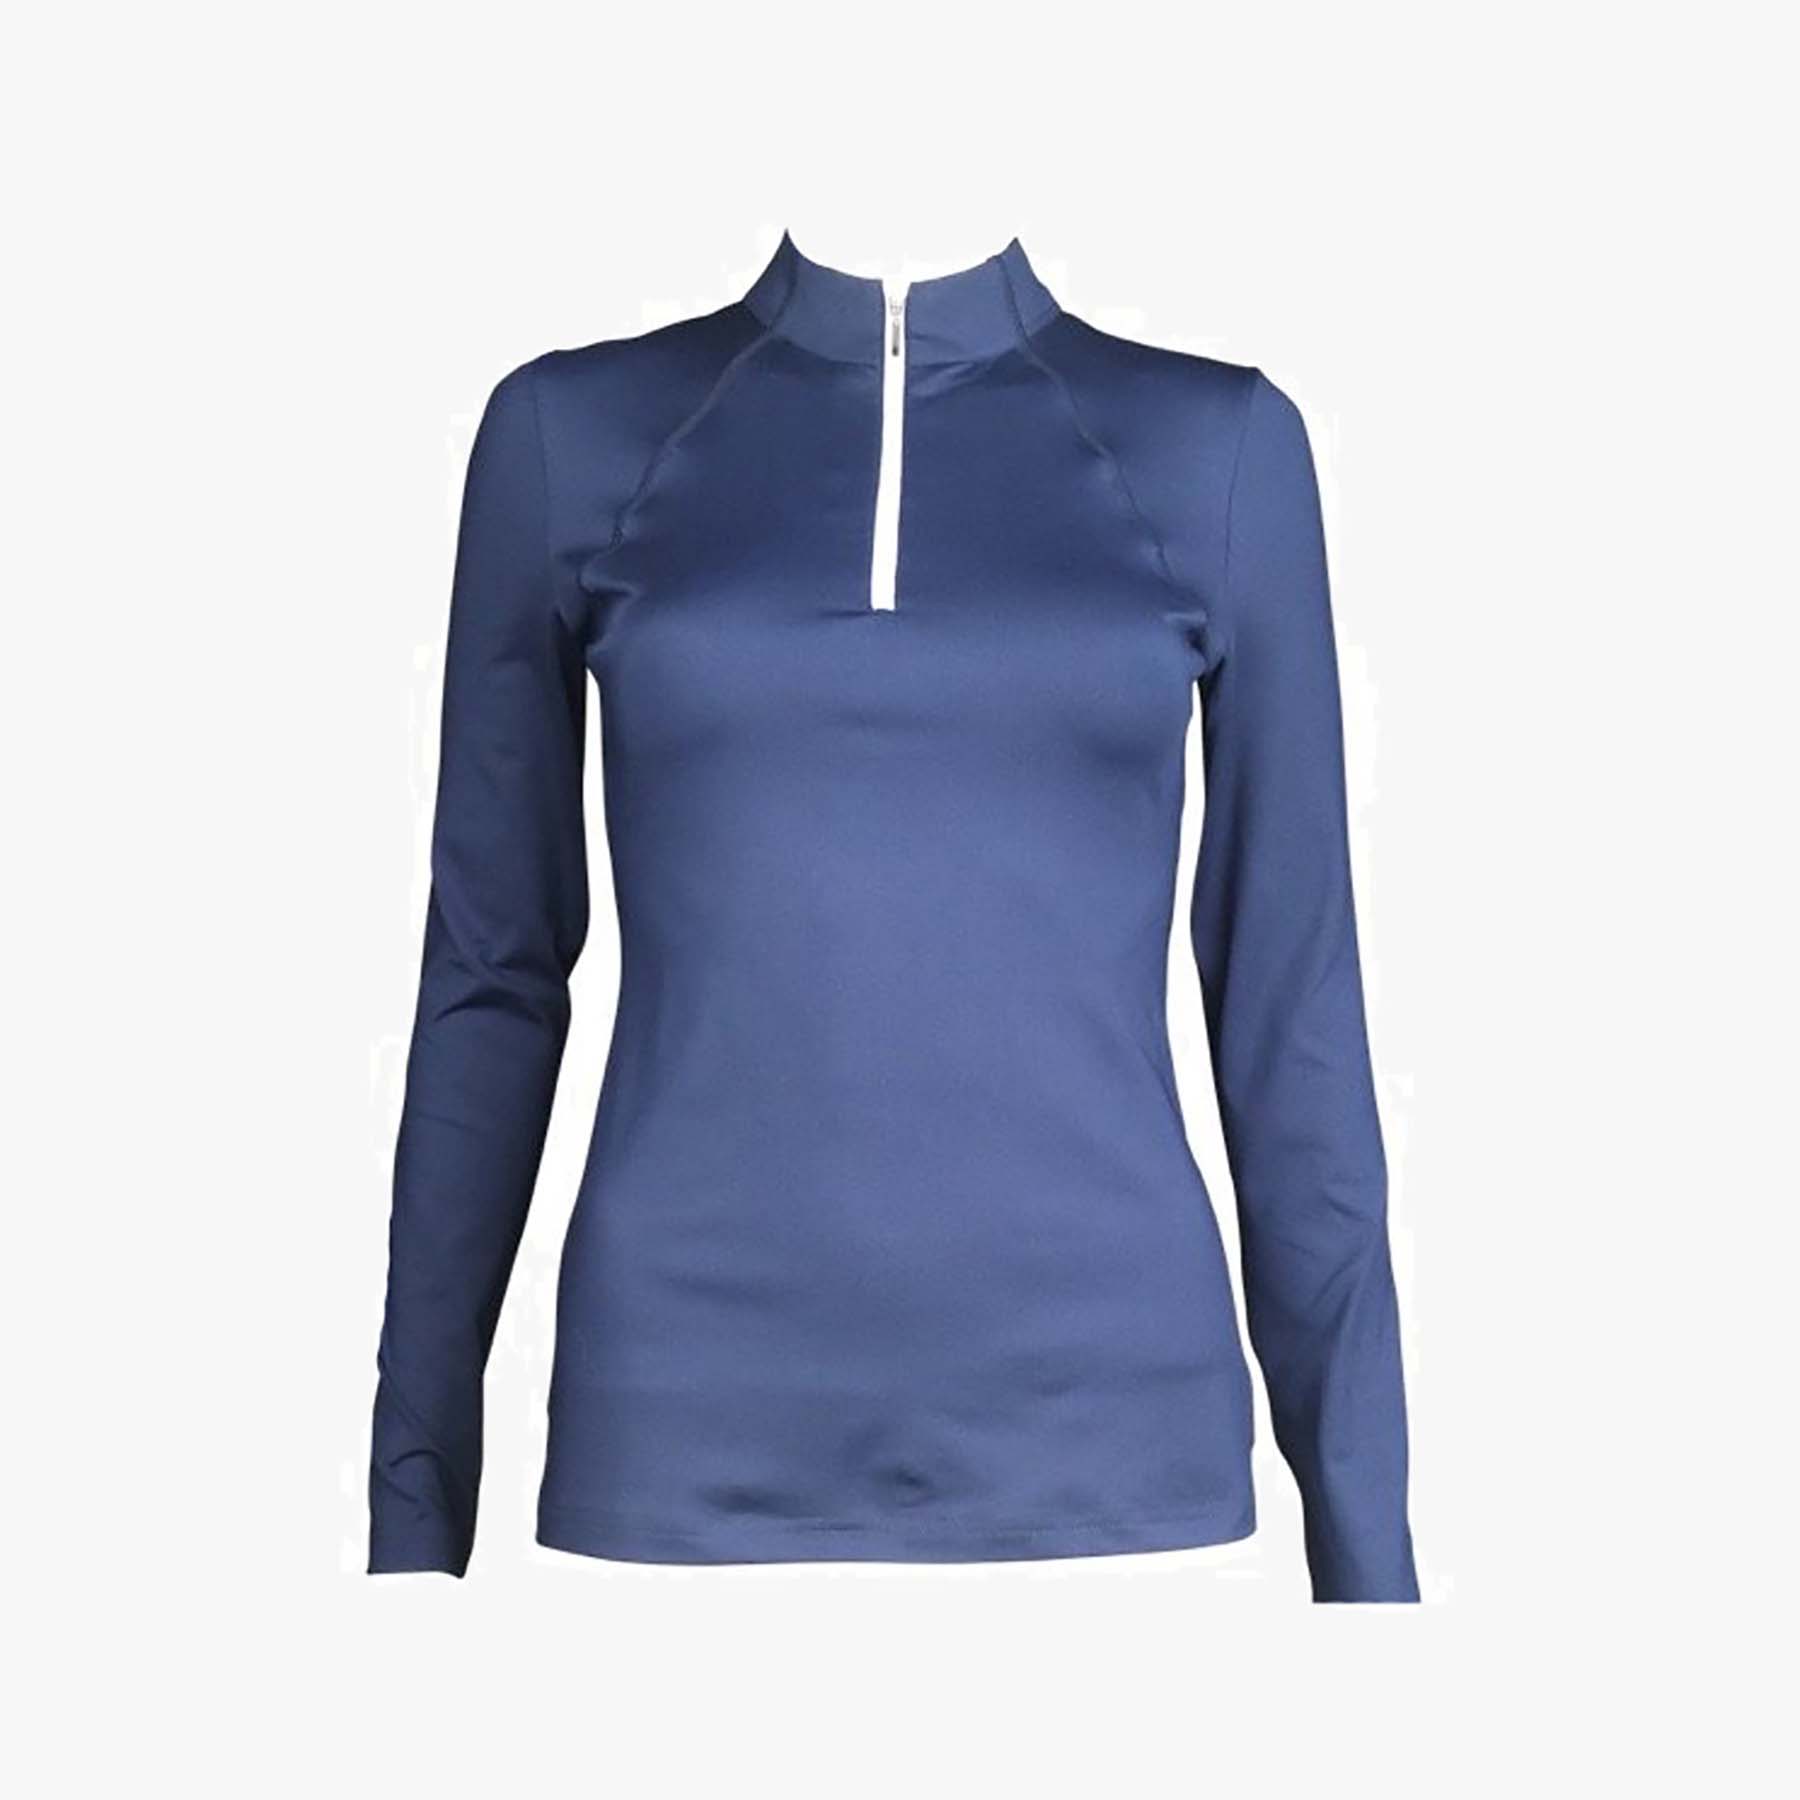 Cameo equine technical base layer